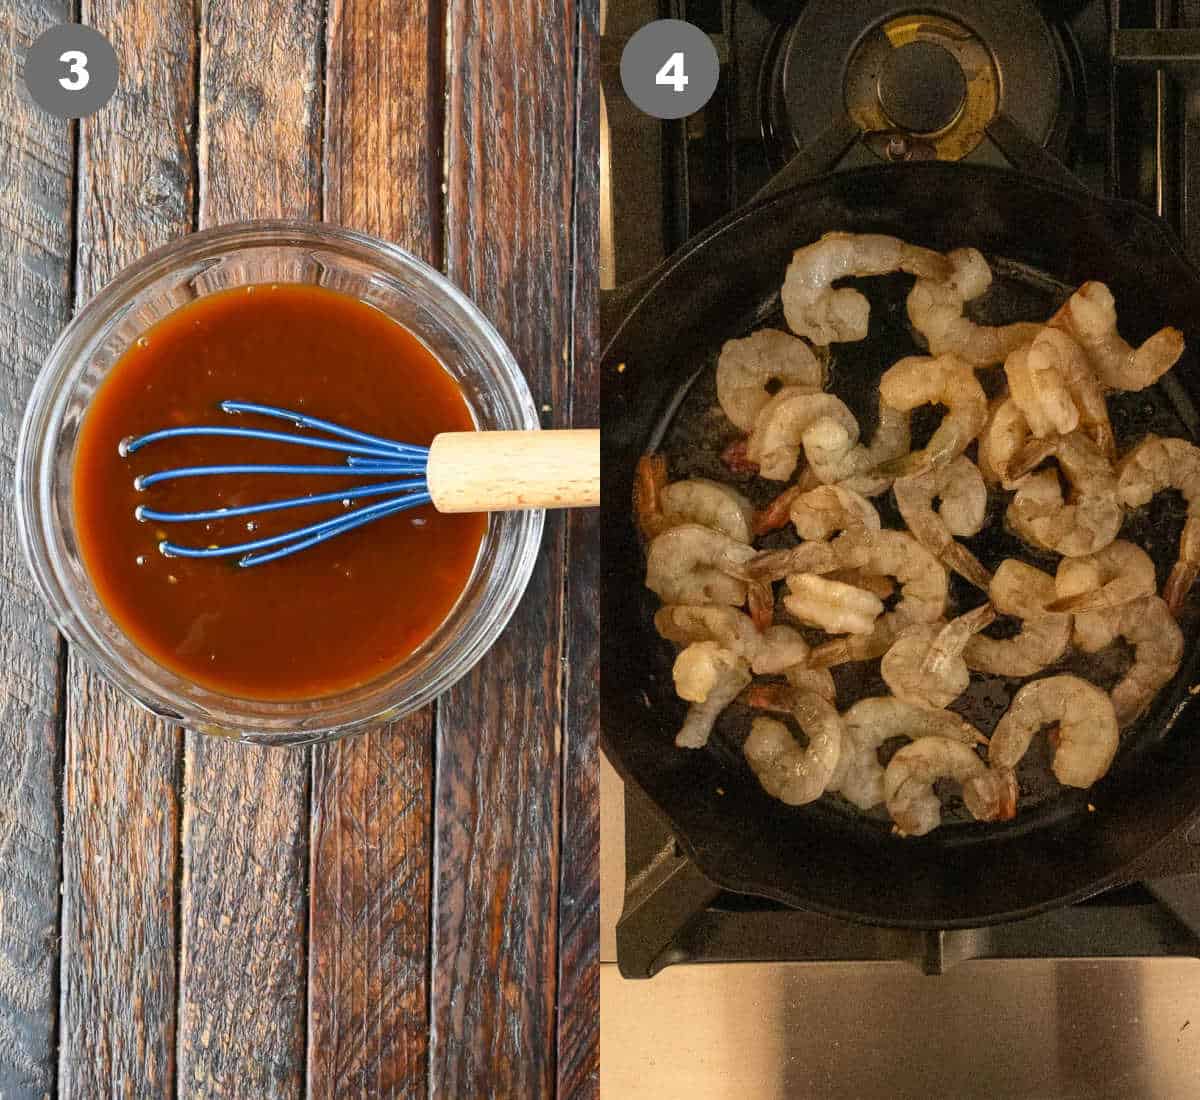 Stir fry sauce mixed together in a small bowl. Then raw shrimp added into a skillet.